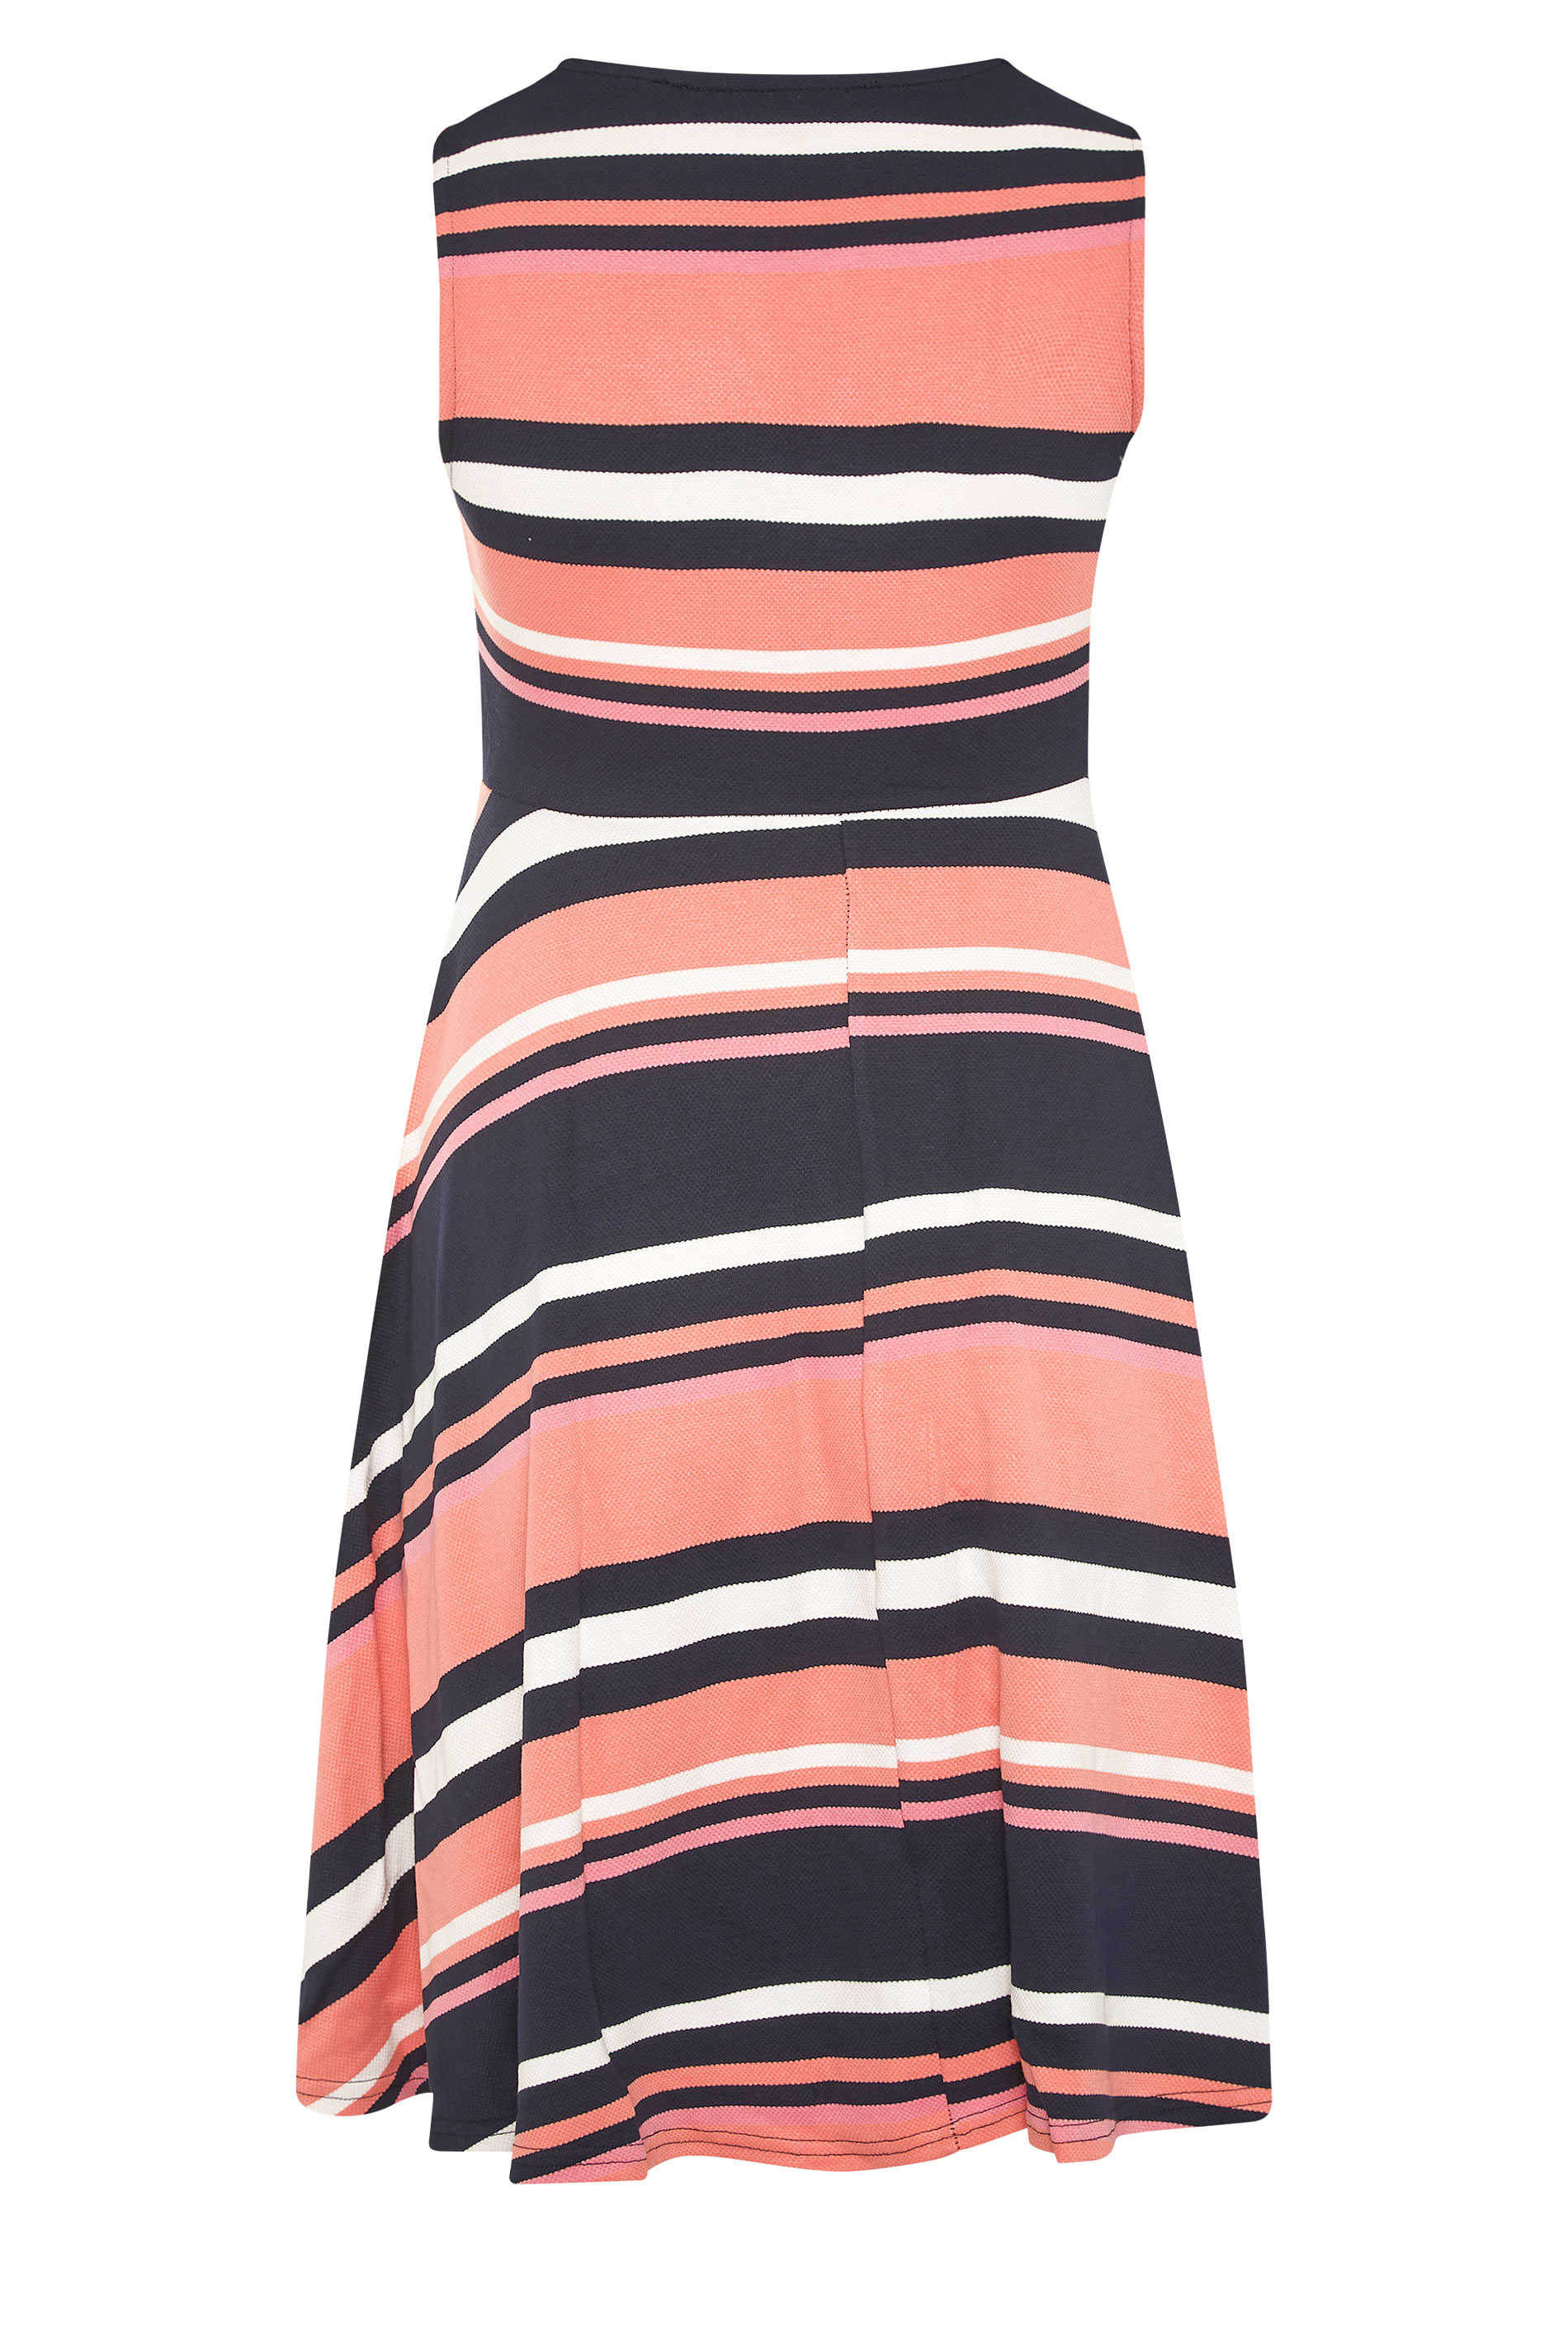 Robes Grande Taille Grande taille  Robes Patineuses | Curve Pink Stripe Wrap Skater Dress - YN77447